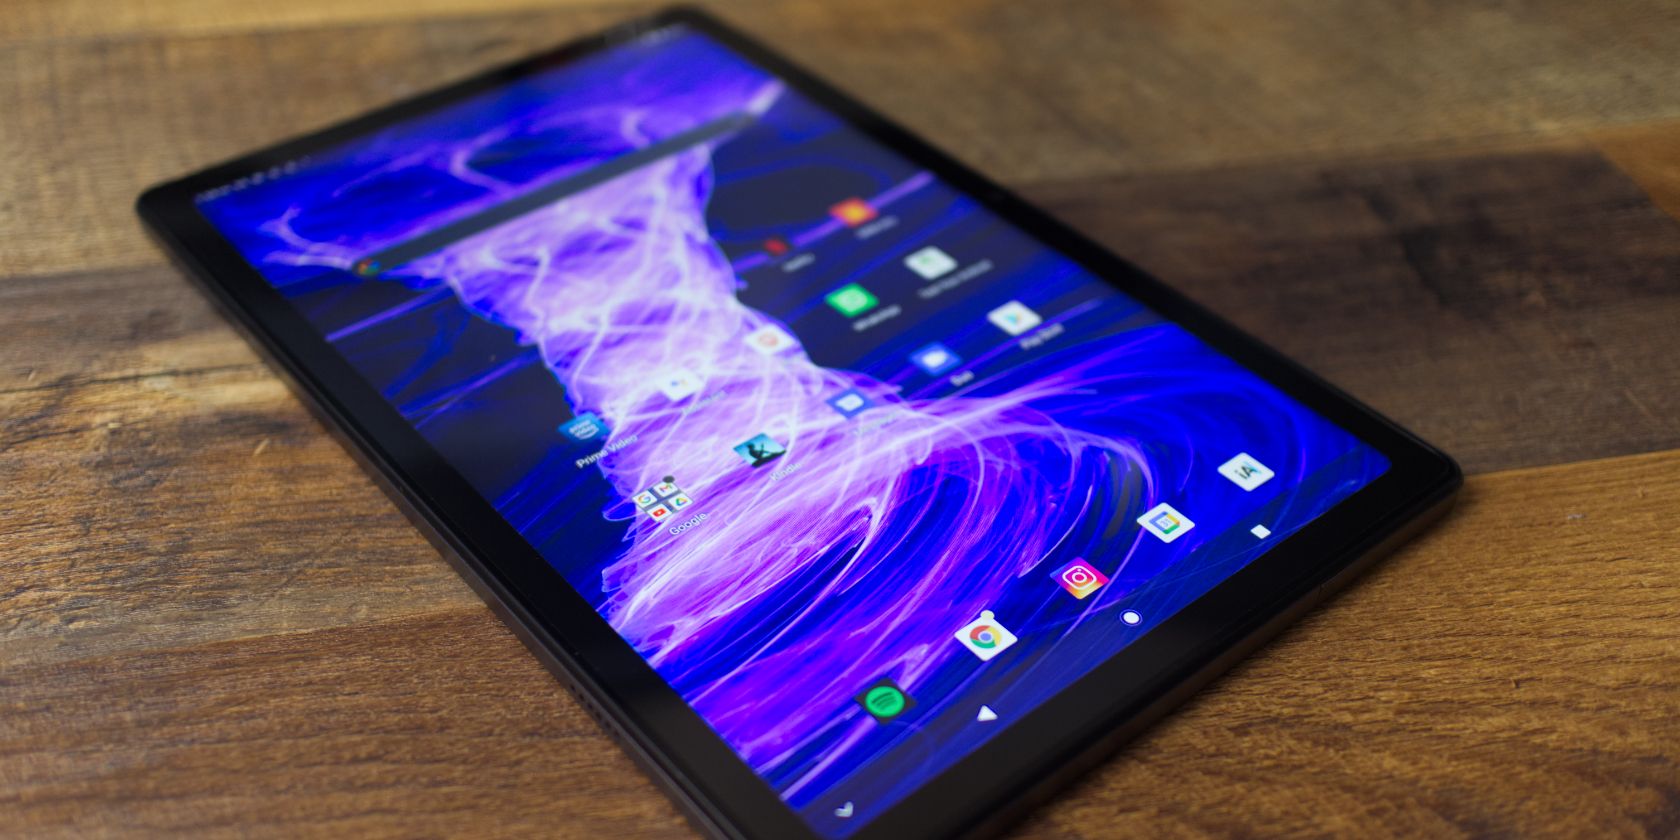 Teclast Tablet Featured Image